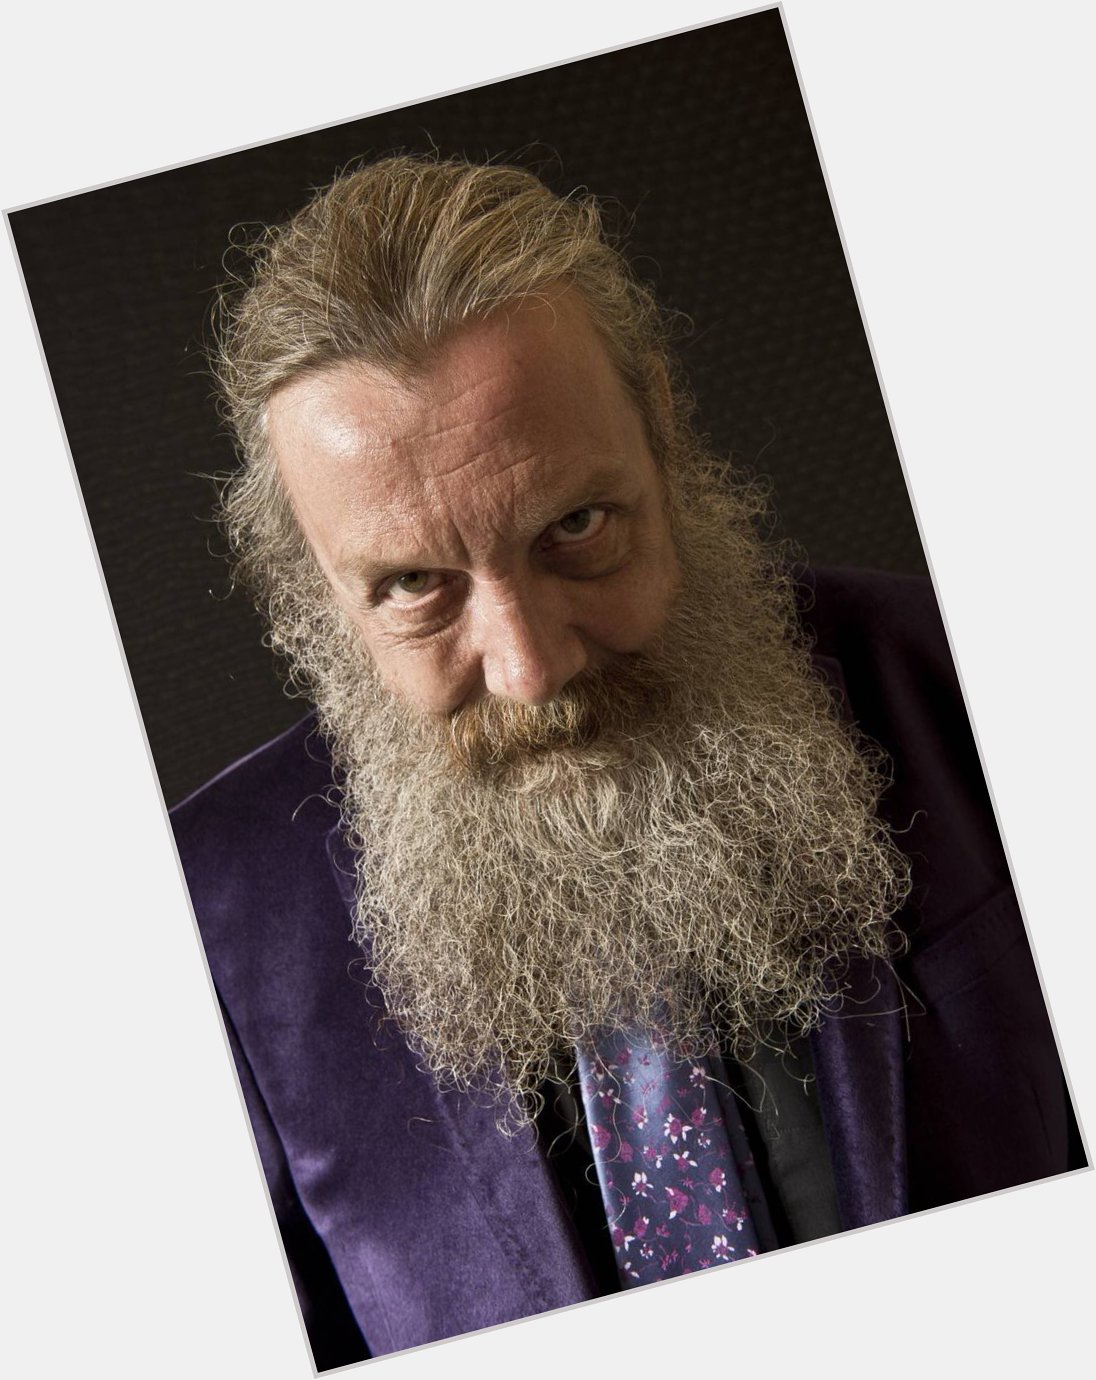 Happy birthday to Alan Moore, one of the greatest comic creators ever. 